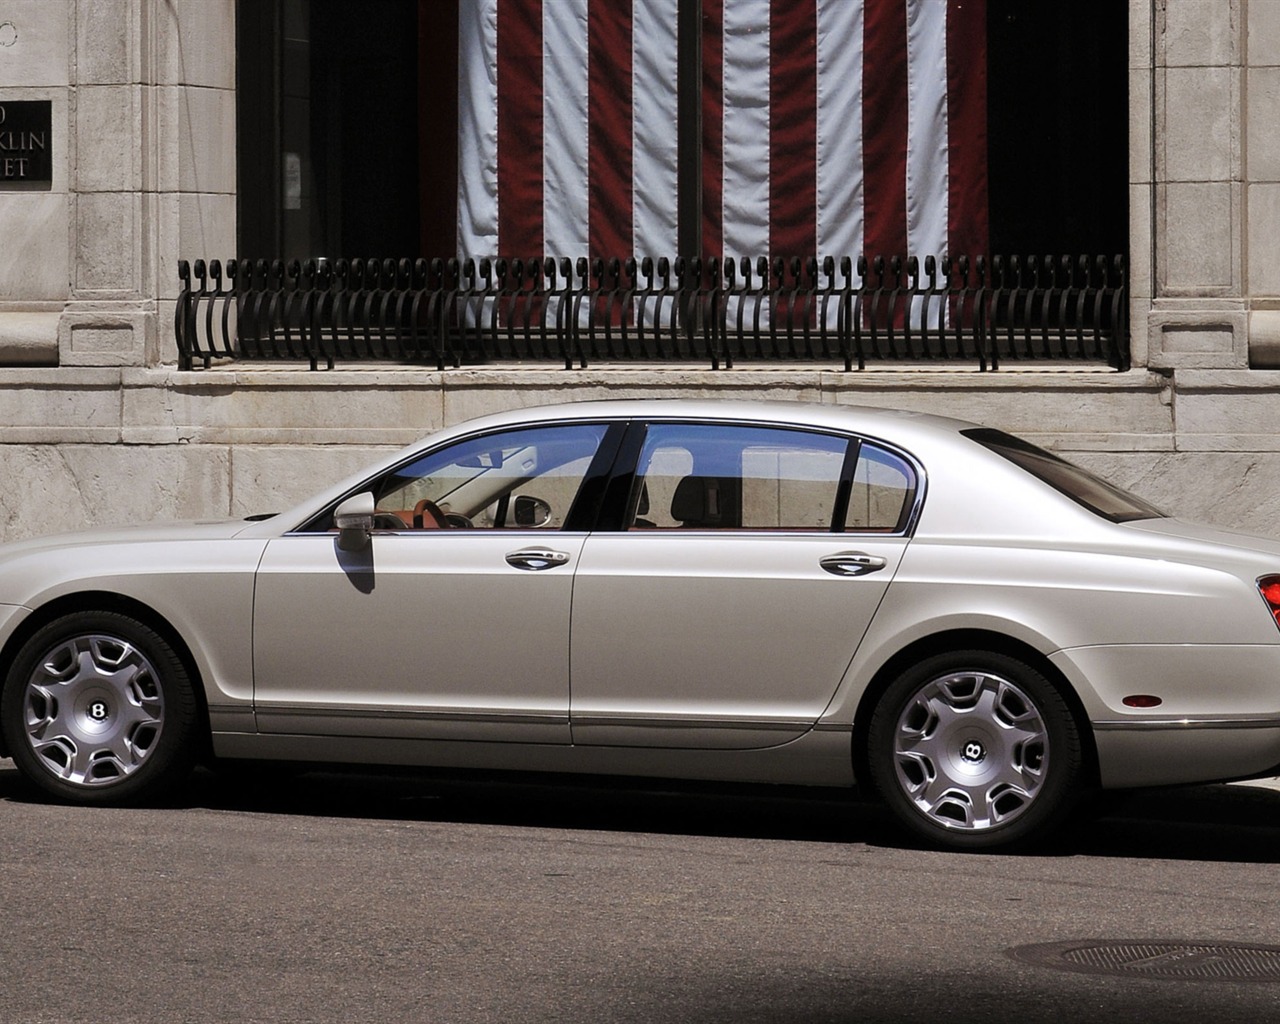 Bentley Continental Flying Spur - 2008 宾利12 - 1280x1024